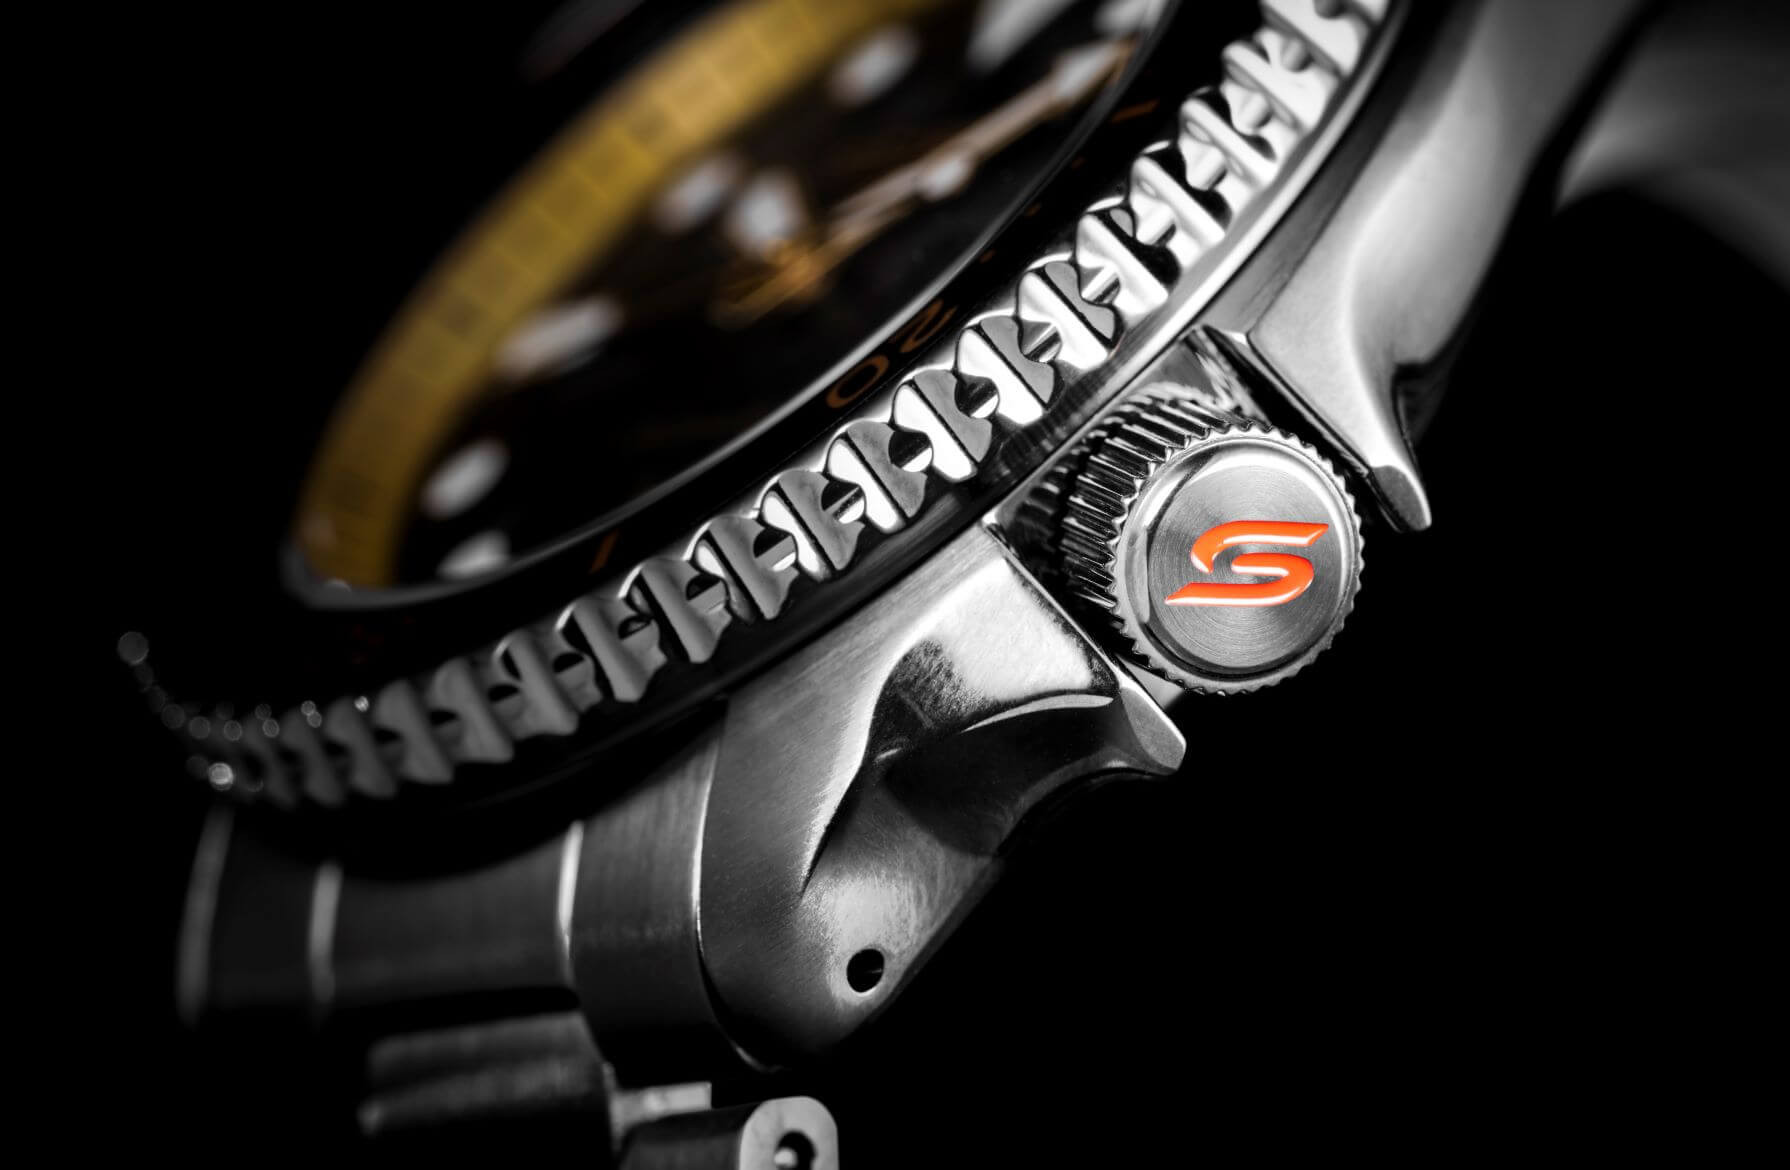 Seiko 5 Supercars Limited Edition Automatic Watch. Crown